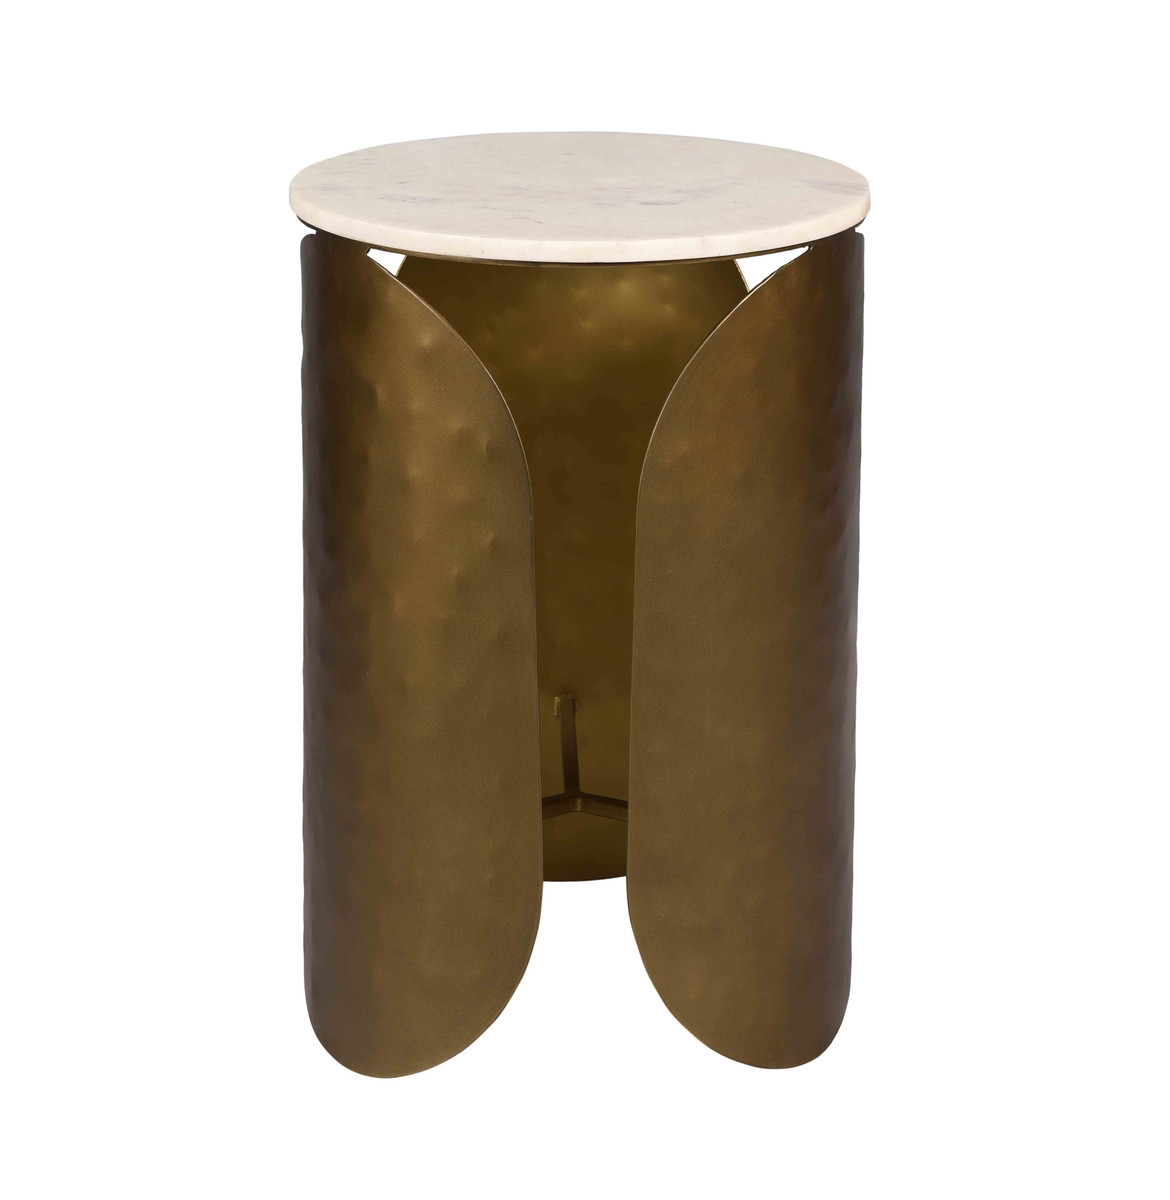 Indio White Marble Side Table - Image 1